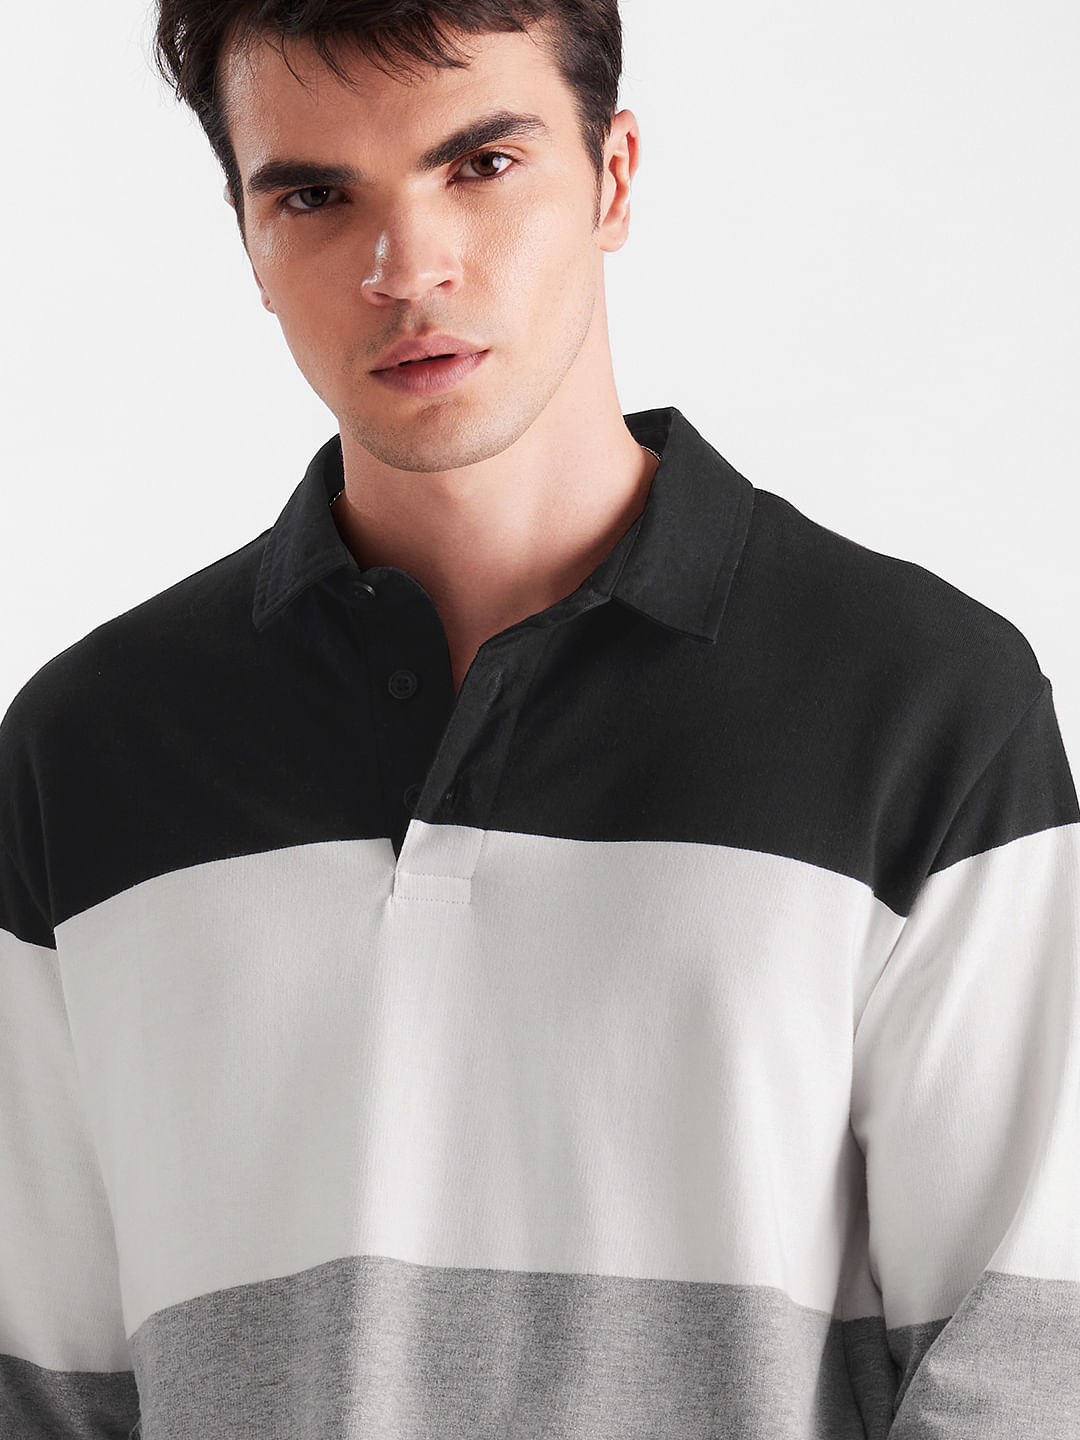 Buy Solids: Black, White, Grey Men Rugby Polos Online